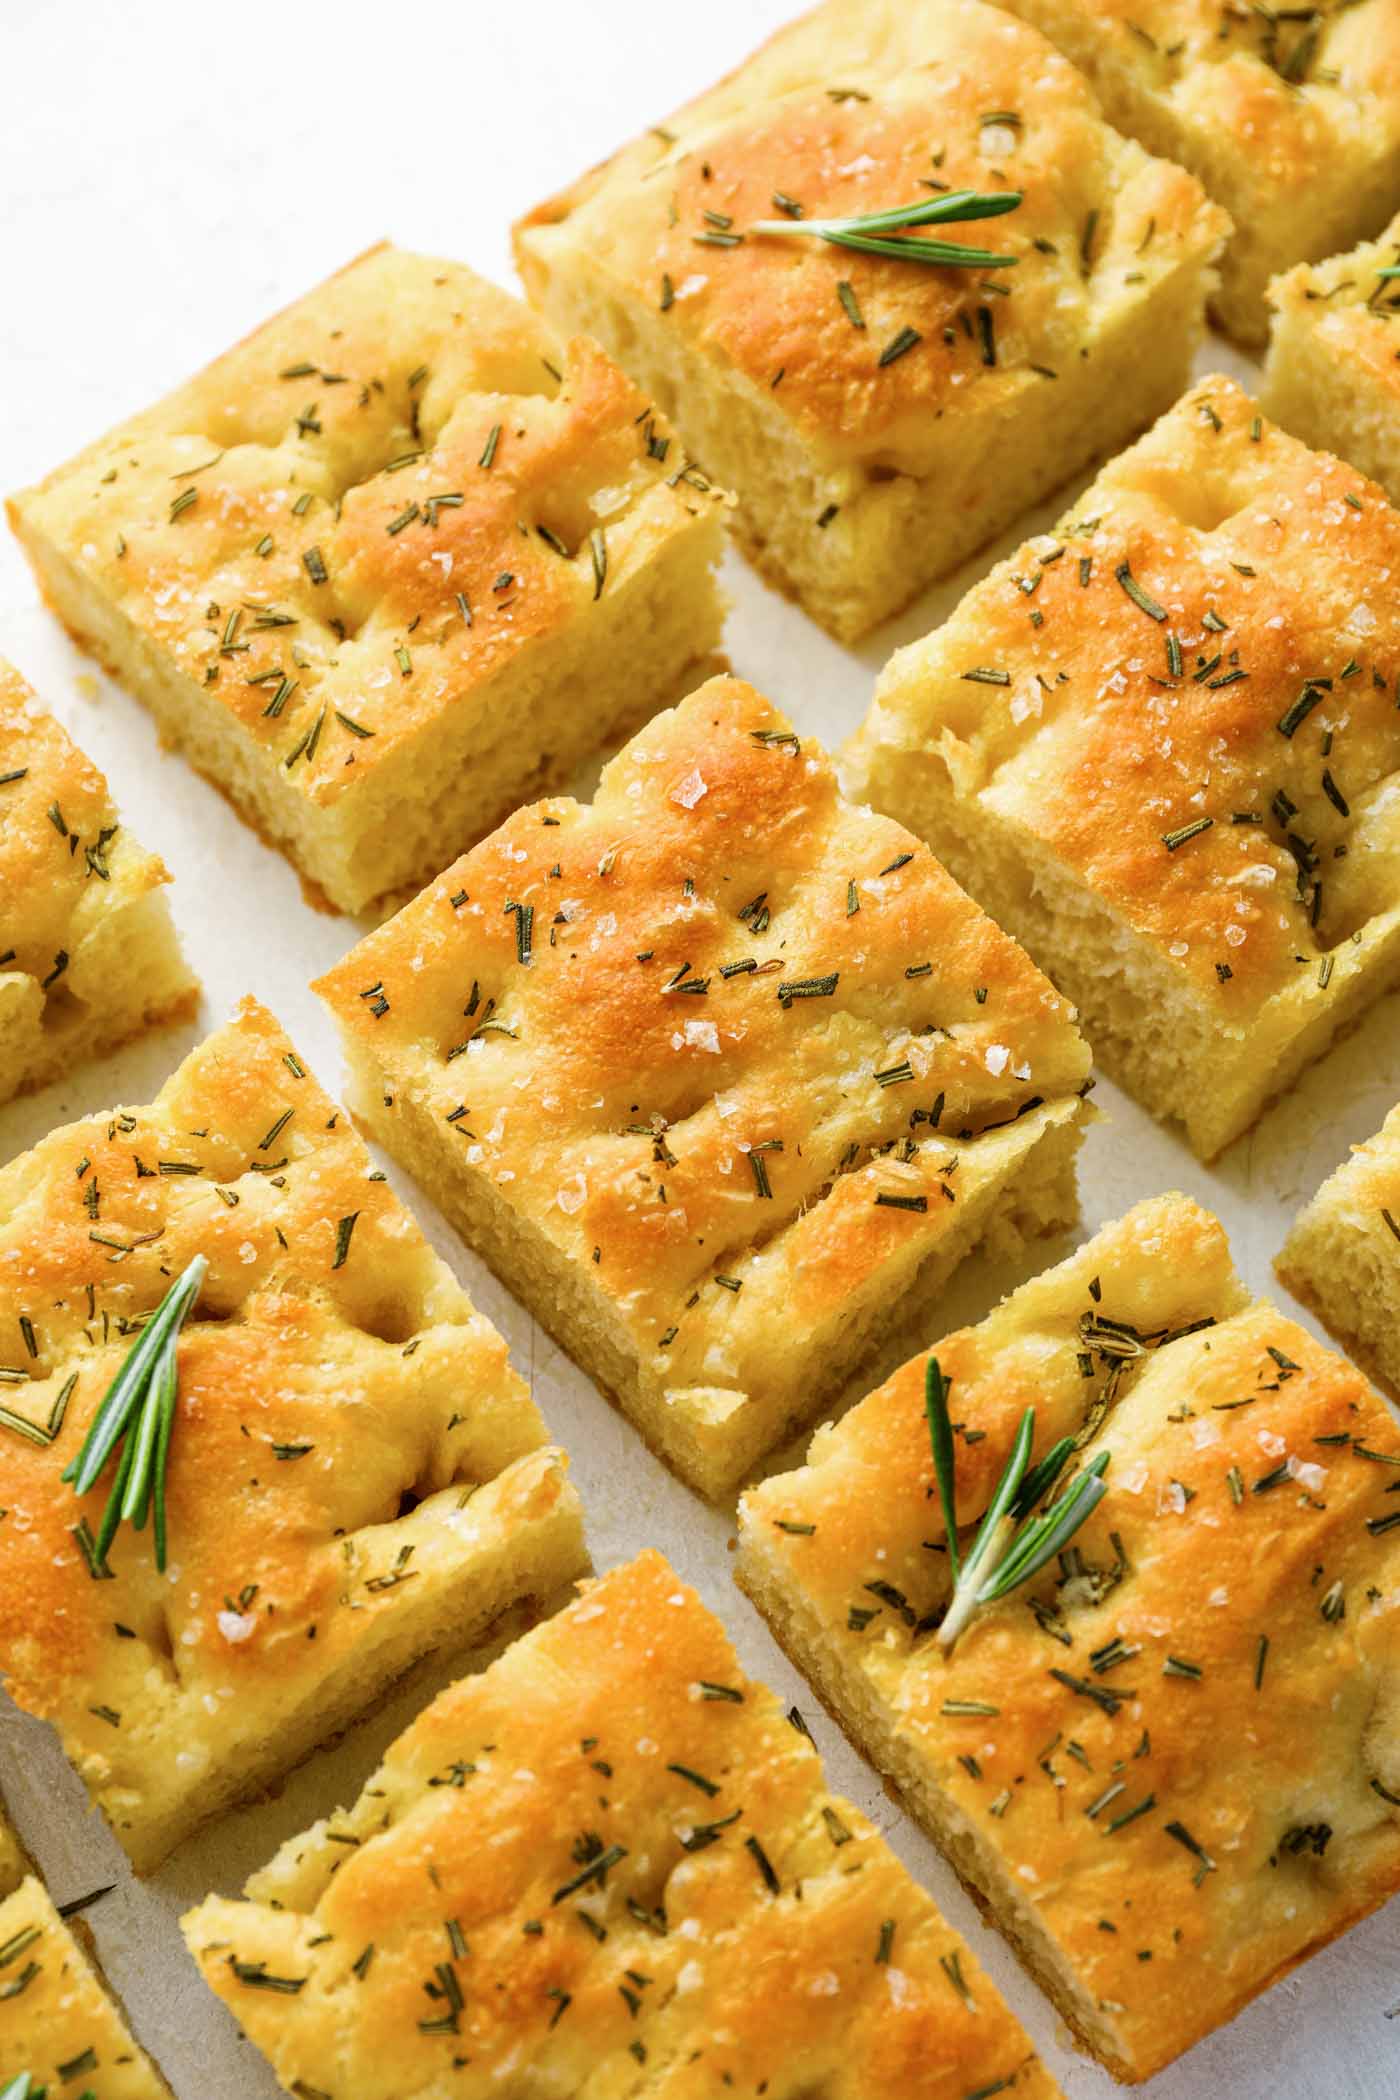 Slices of focaccia bread with fresh rosemary garnish.